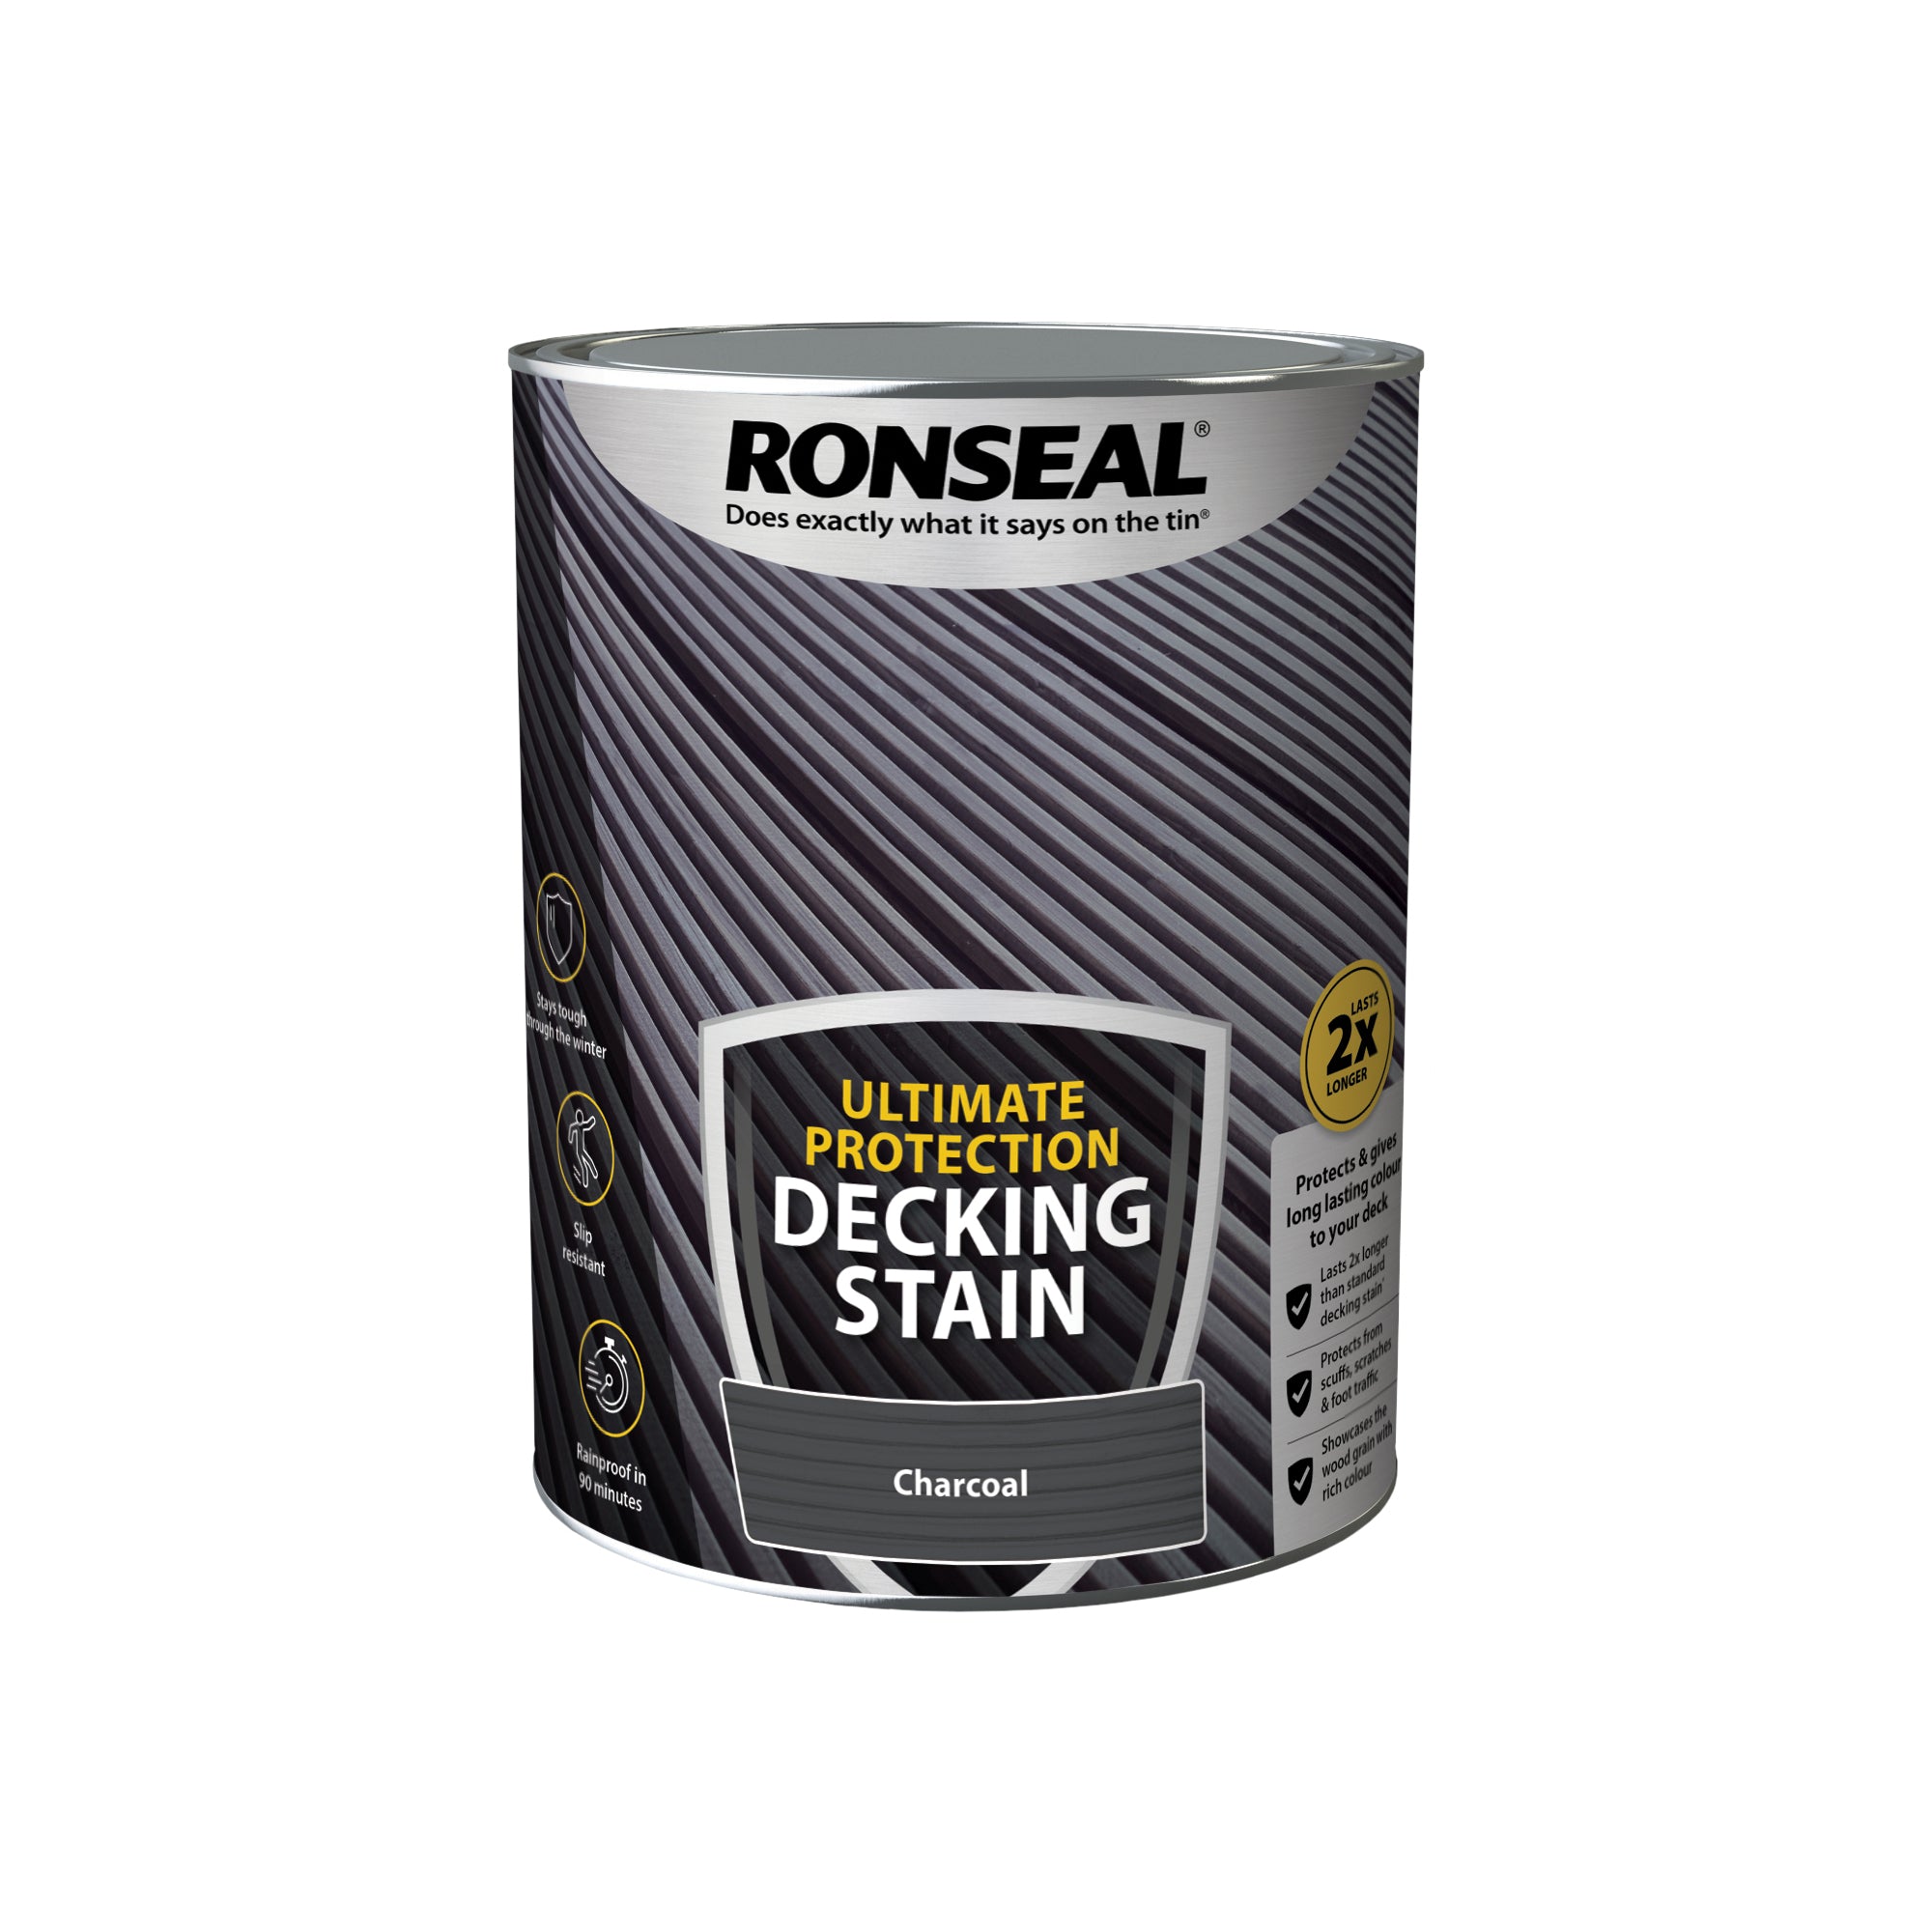 Ronseal-Ultimate-Protection-Decking-Stain-Charcoal-5L